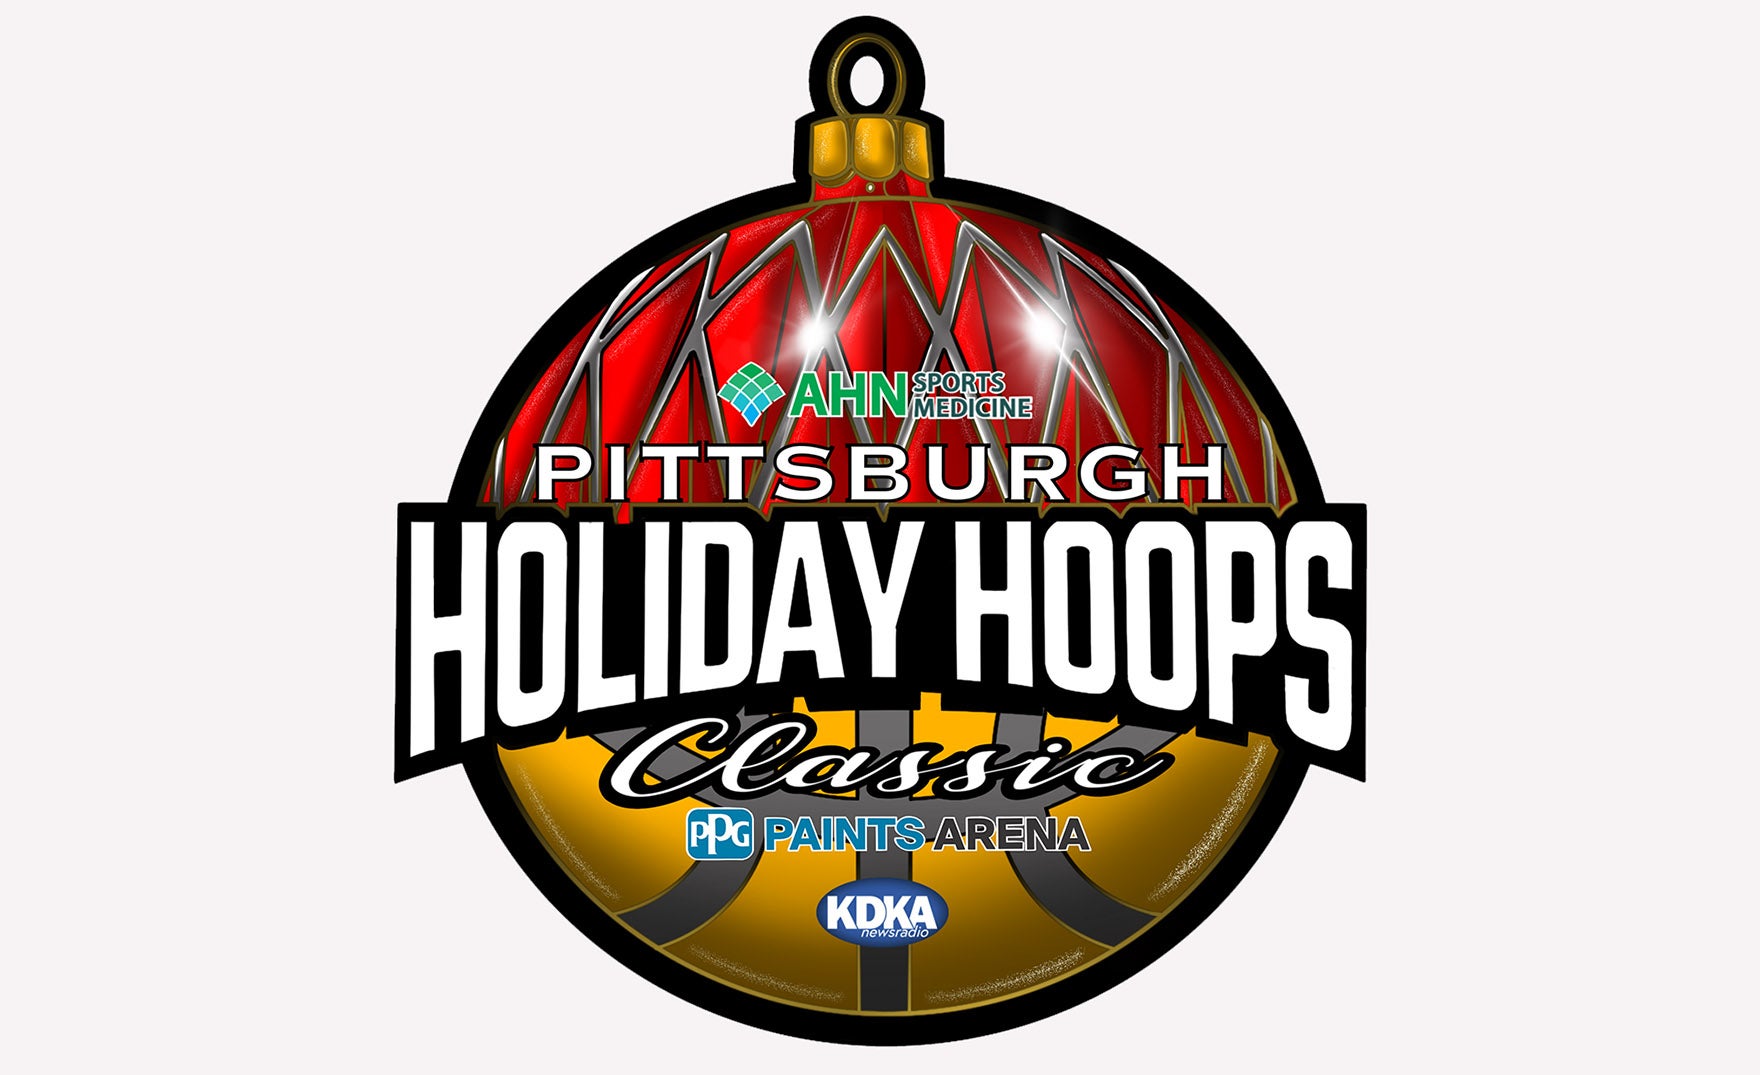 AHN Sports Medicine Pittsburgh Holiday Hoops Classic